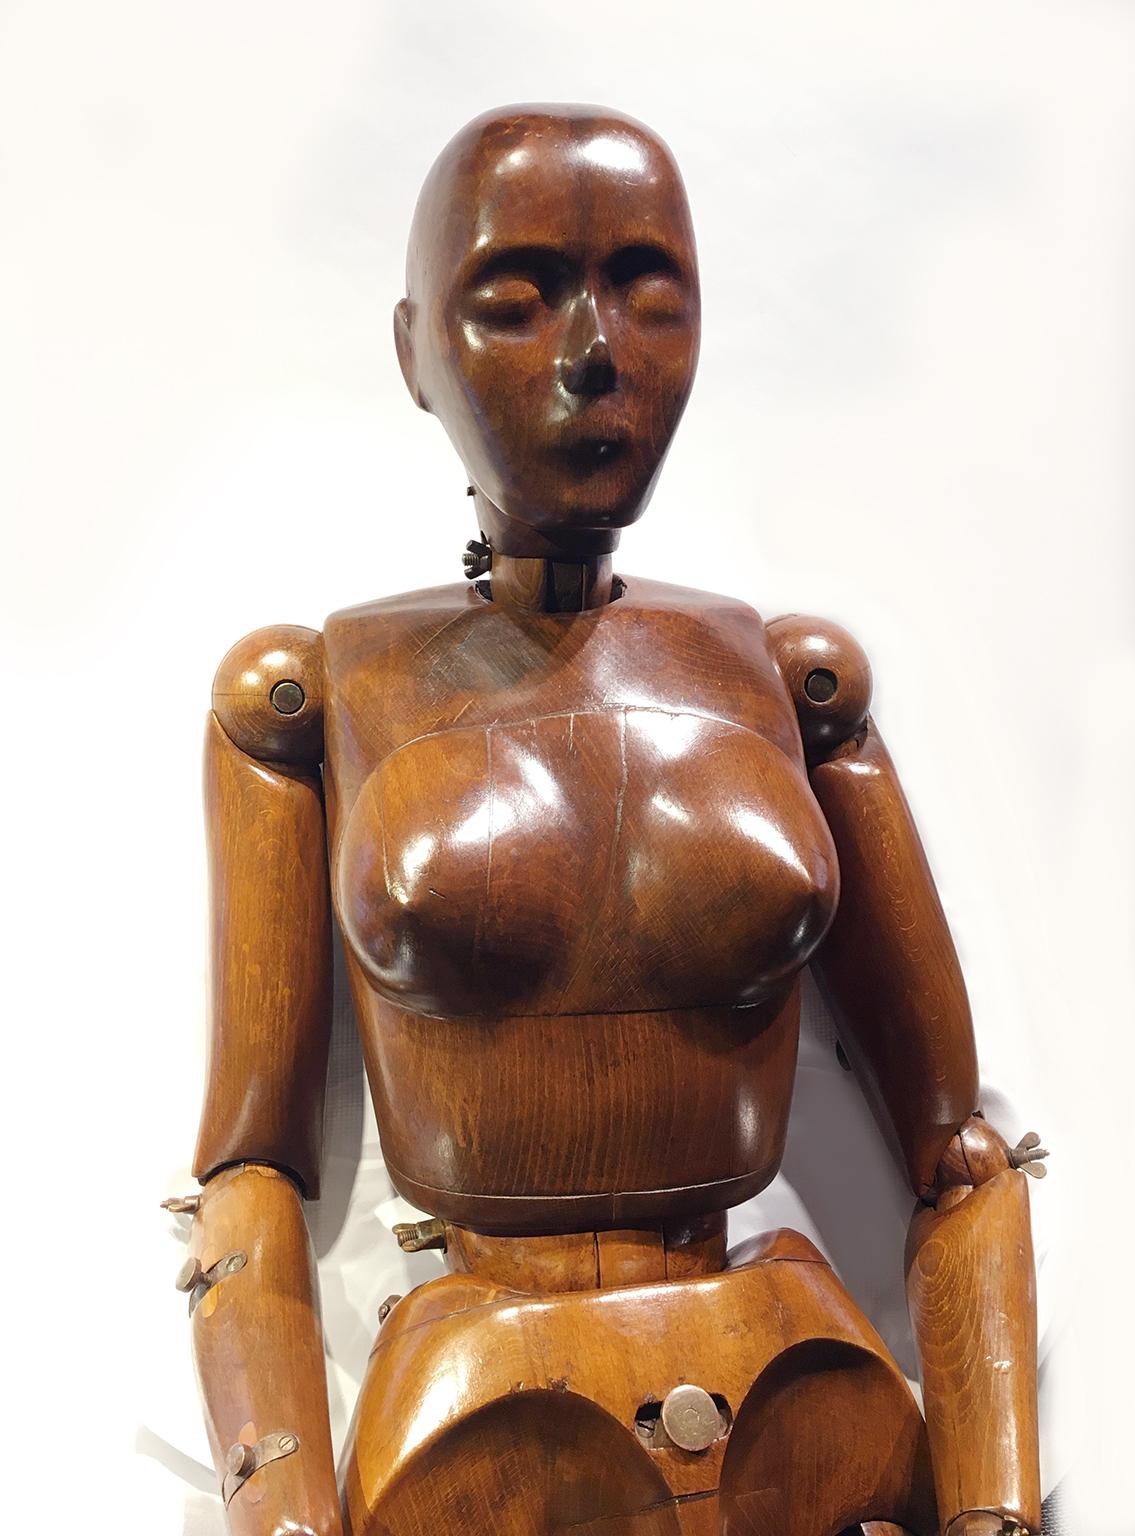 Life-size Female Atelier Mannequin
Sculpted and carved beechwood
France, early 20th century

It measures: H 70.07 in x 14.96 x 9.84 in (178 x 38 x 25 cm)
61.72 lb (28 kg)

State of conservation: almost perfect, few slight signs of